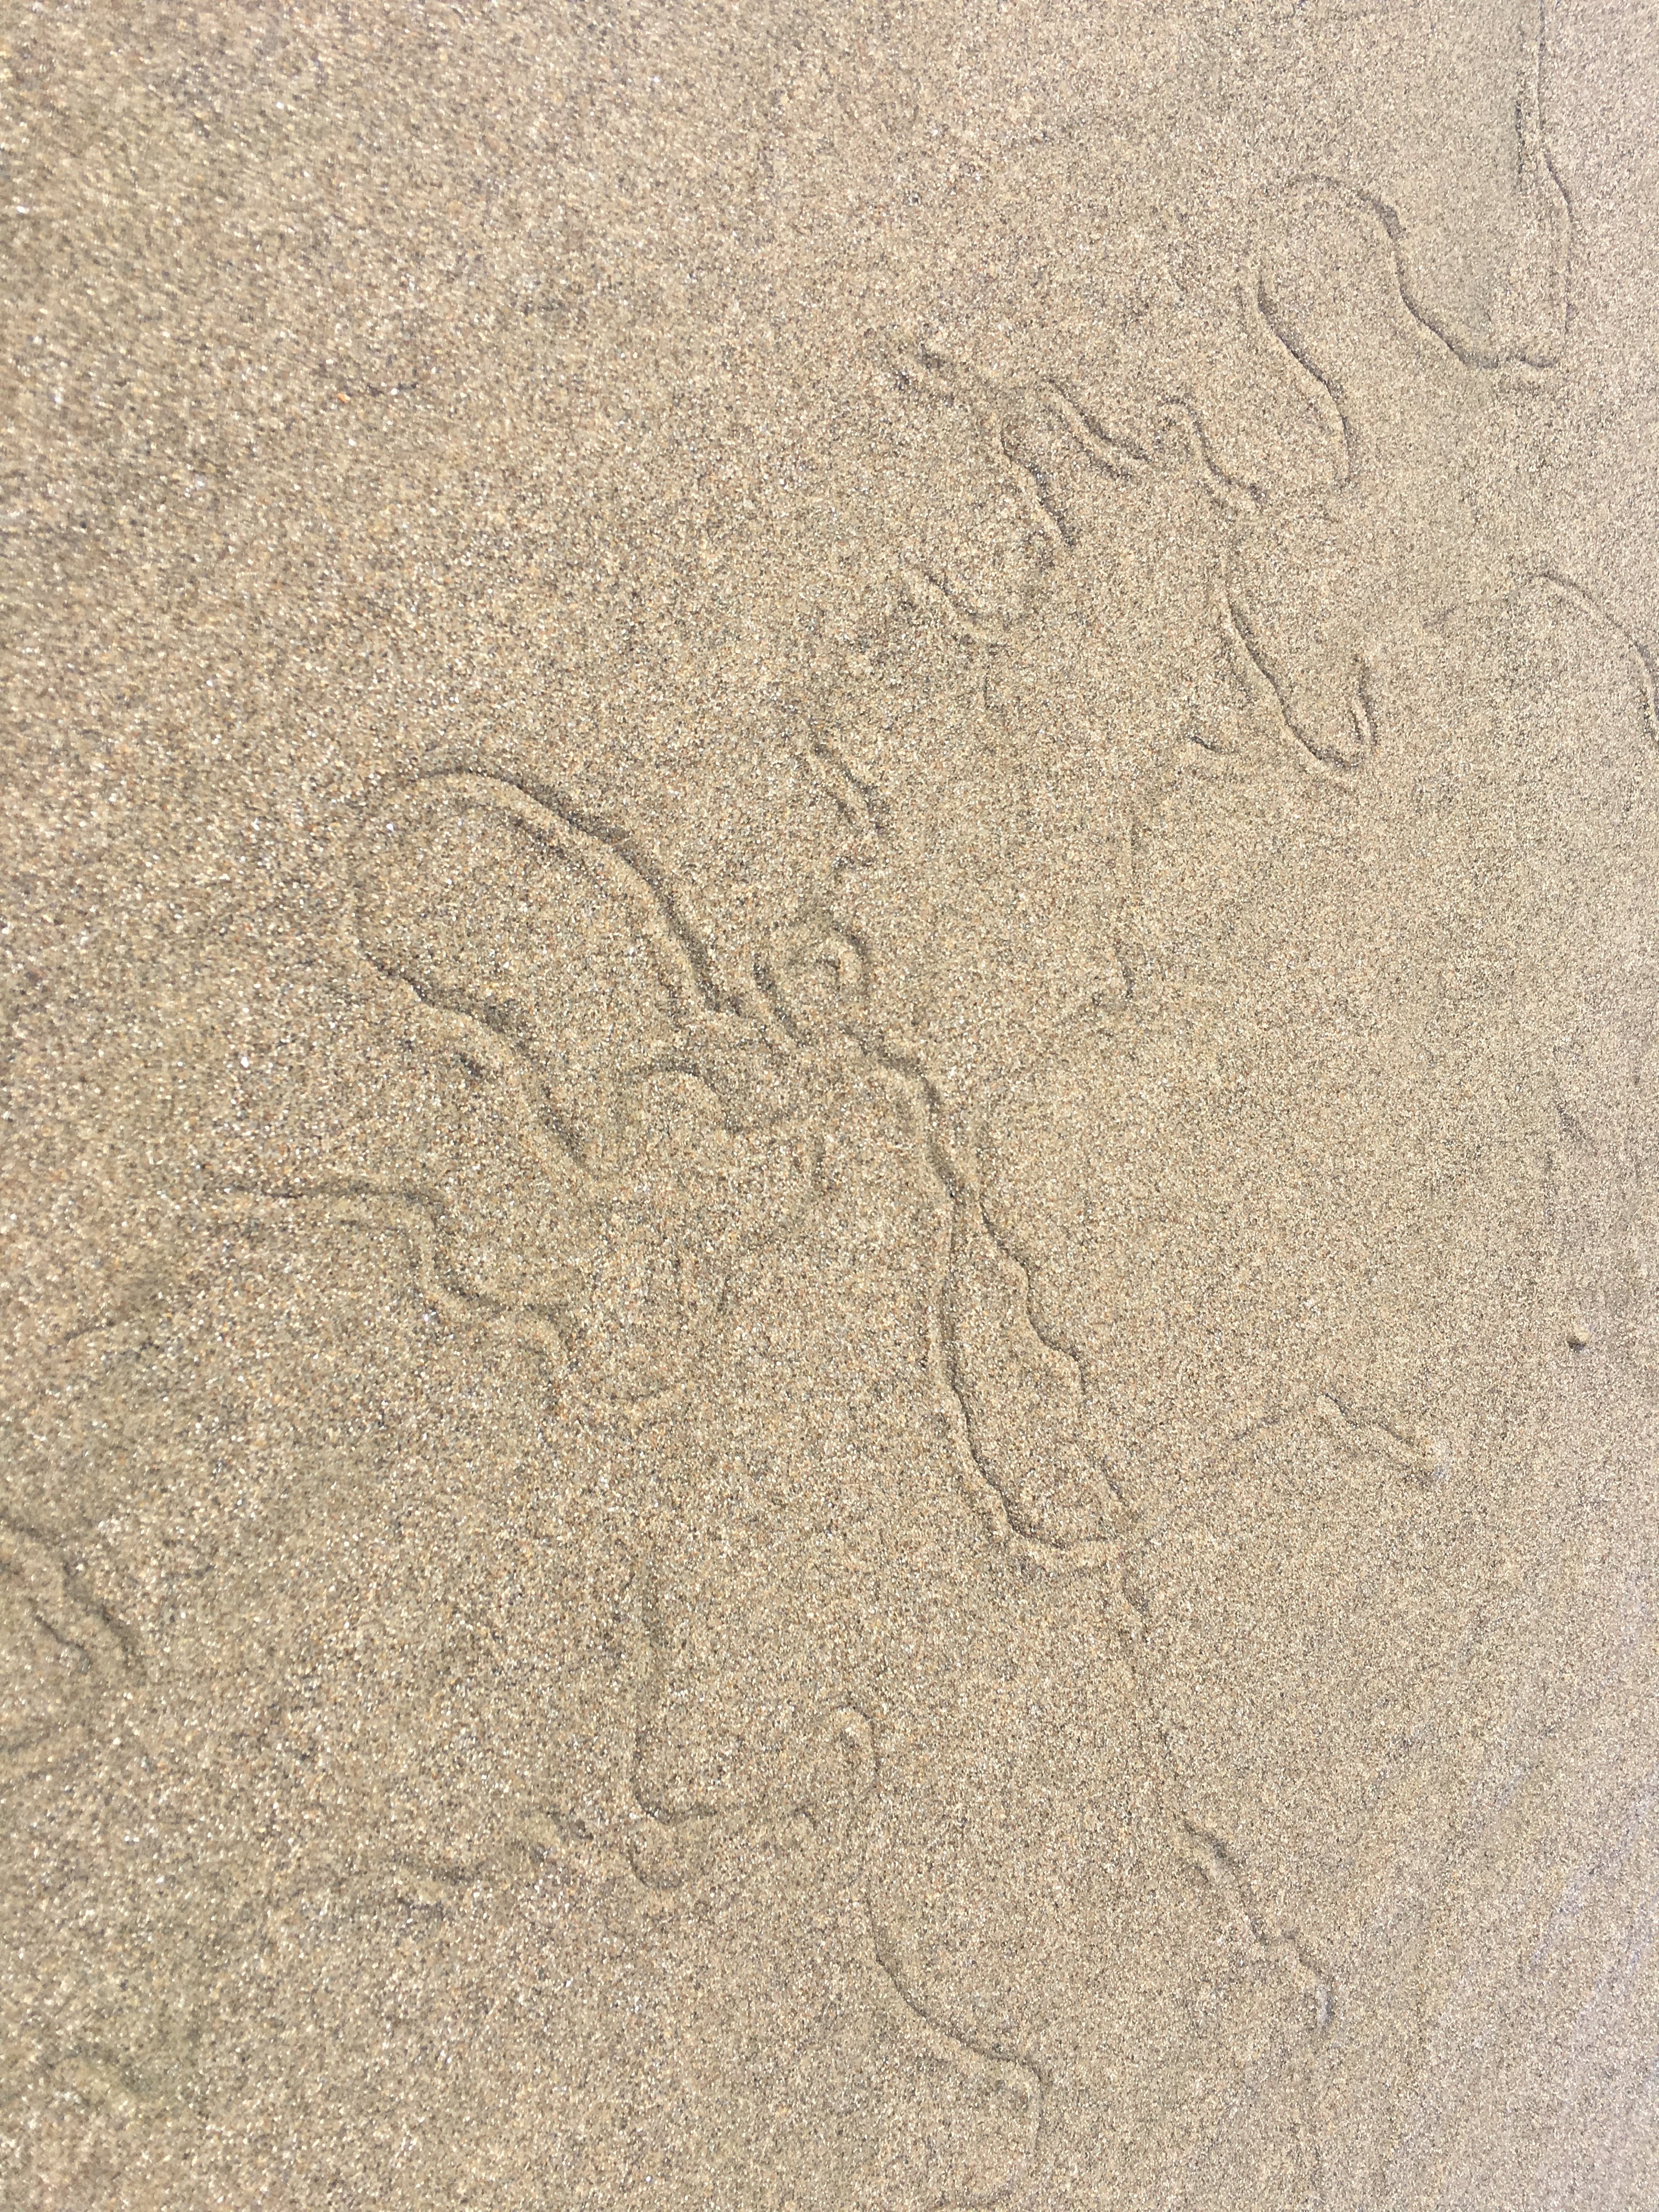 I think these are snail trails. There were parts of the beach covered with these cool squiggles.